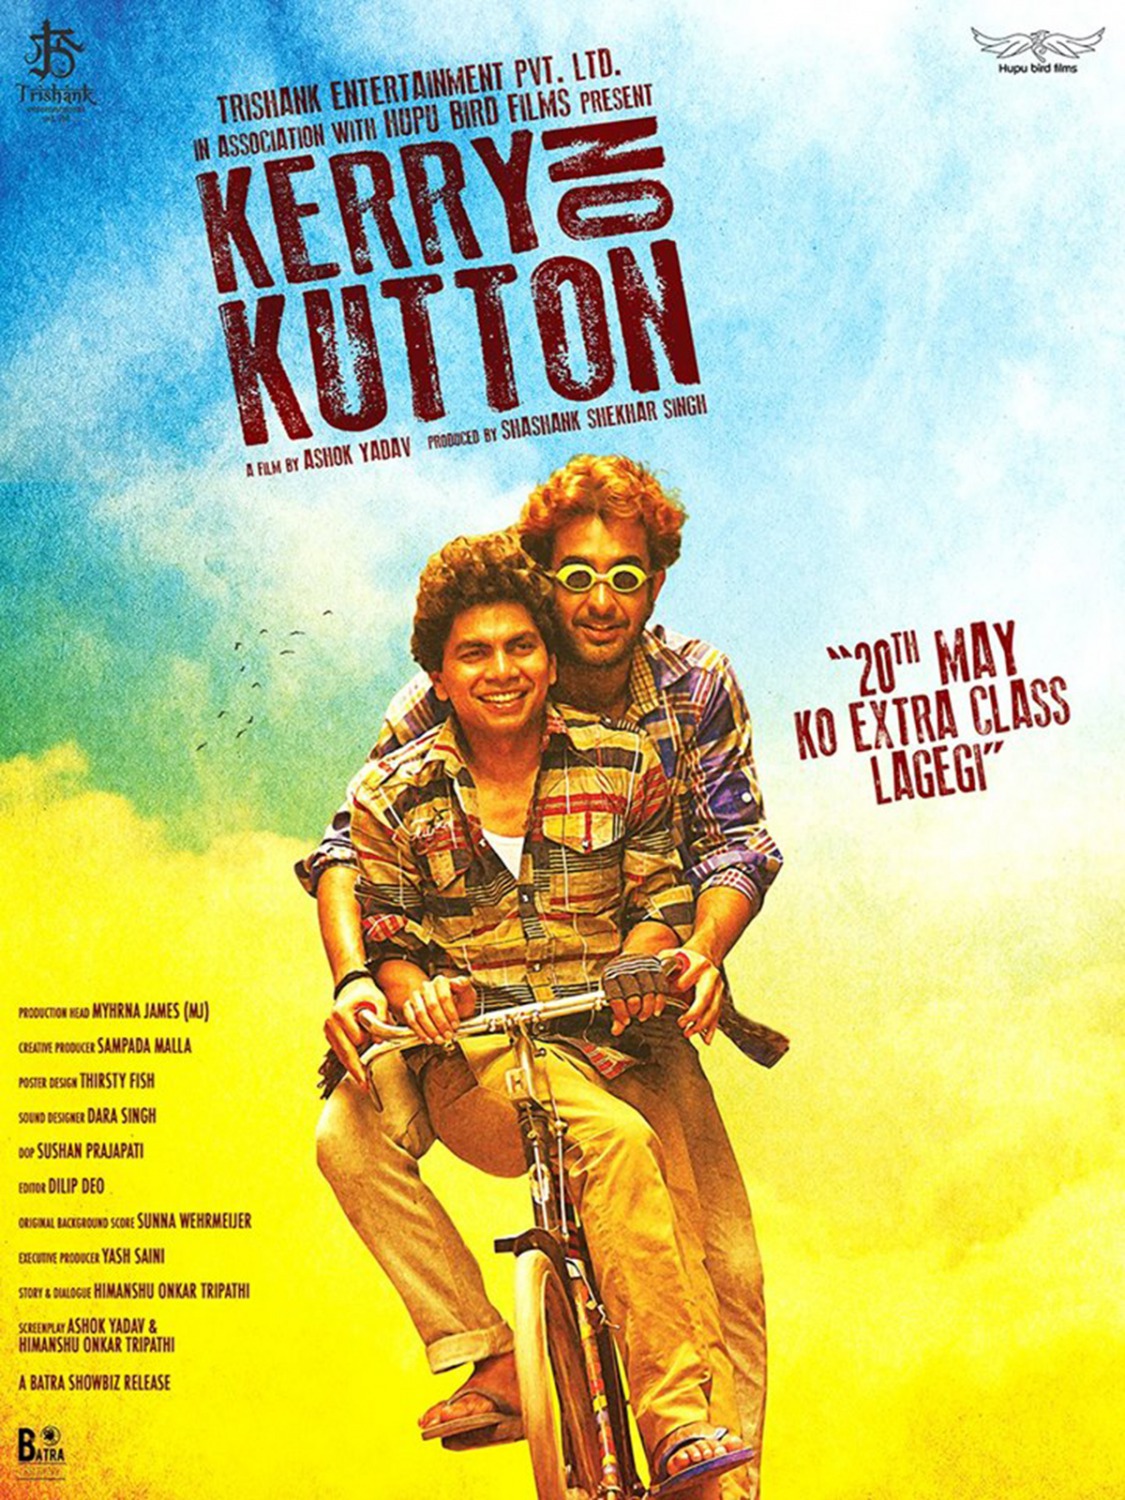 Extra Large Movie Poster Image for Kerry on Kutton 